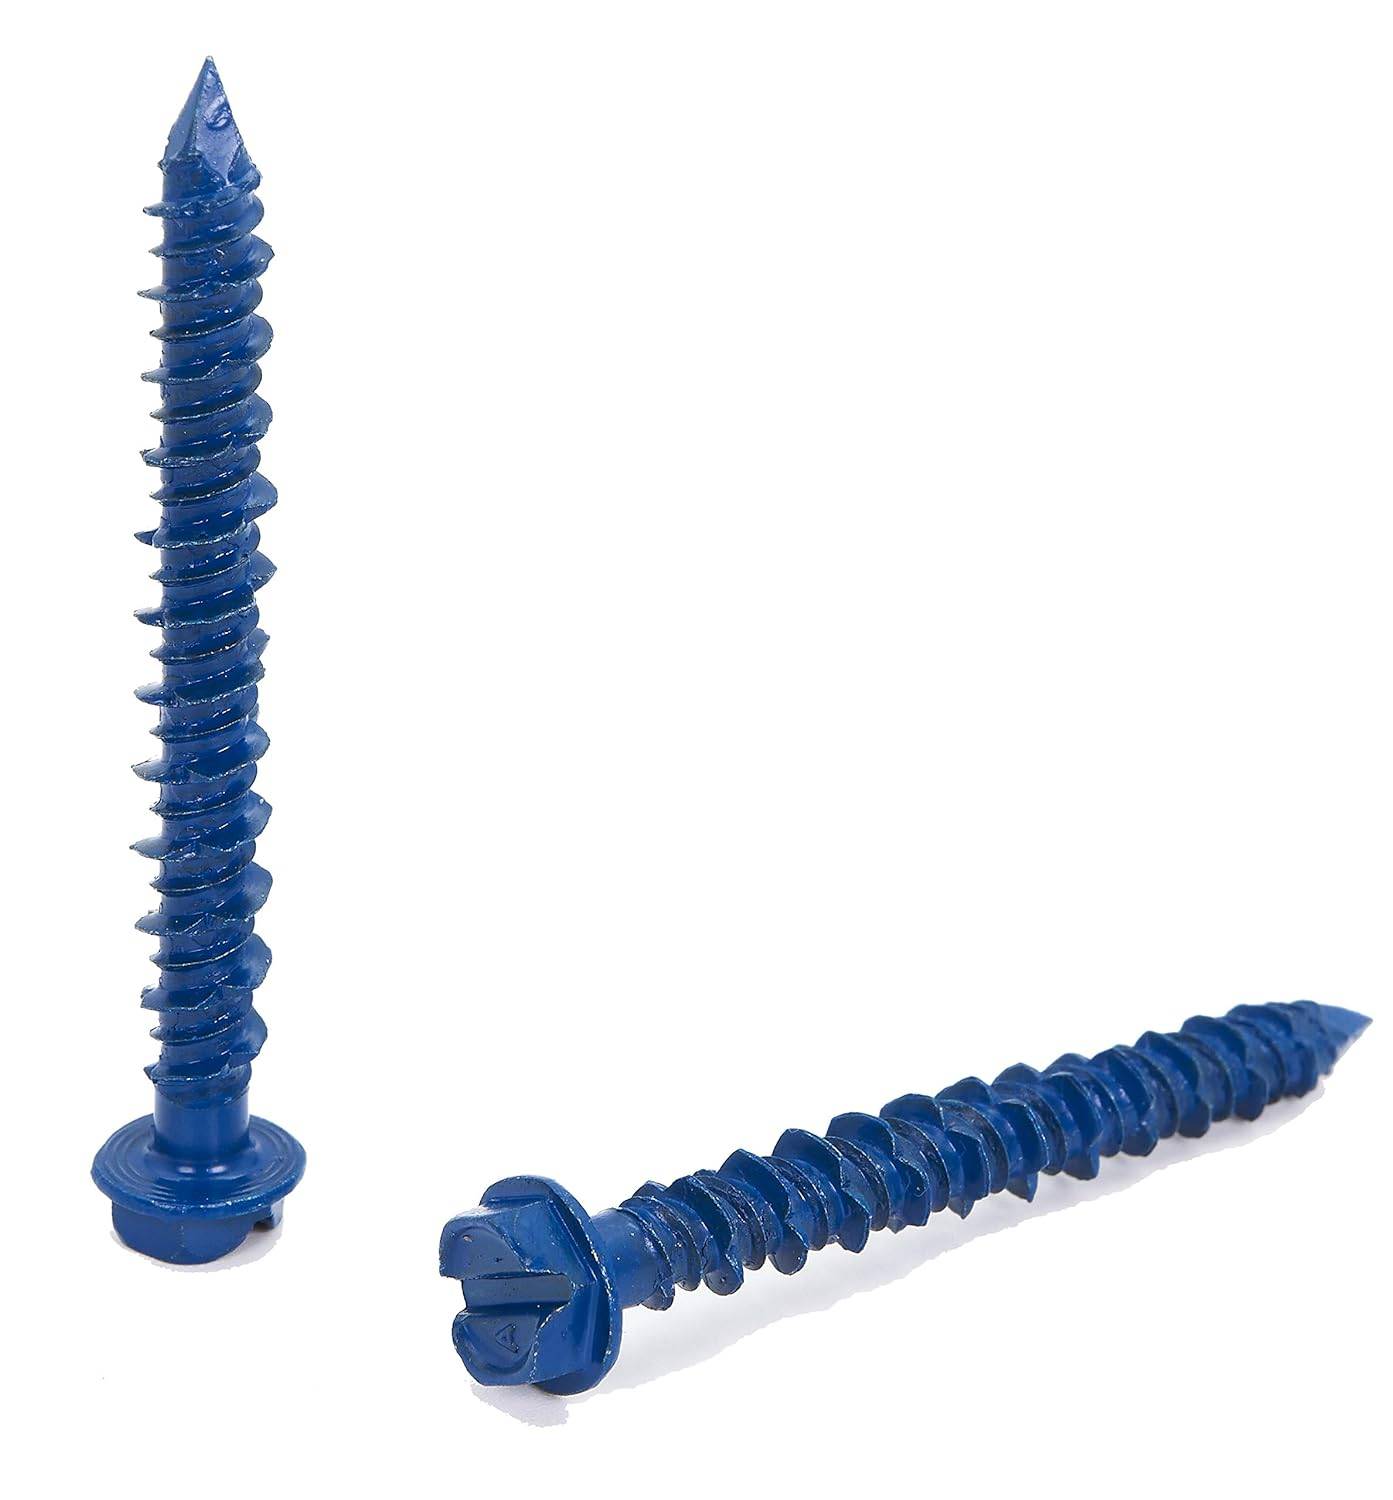 Two blue concrete screws against a white background.